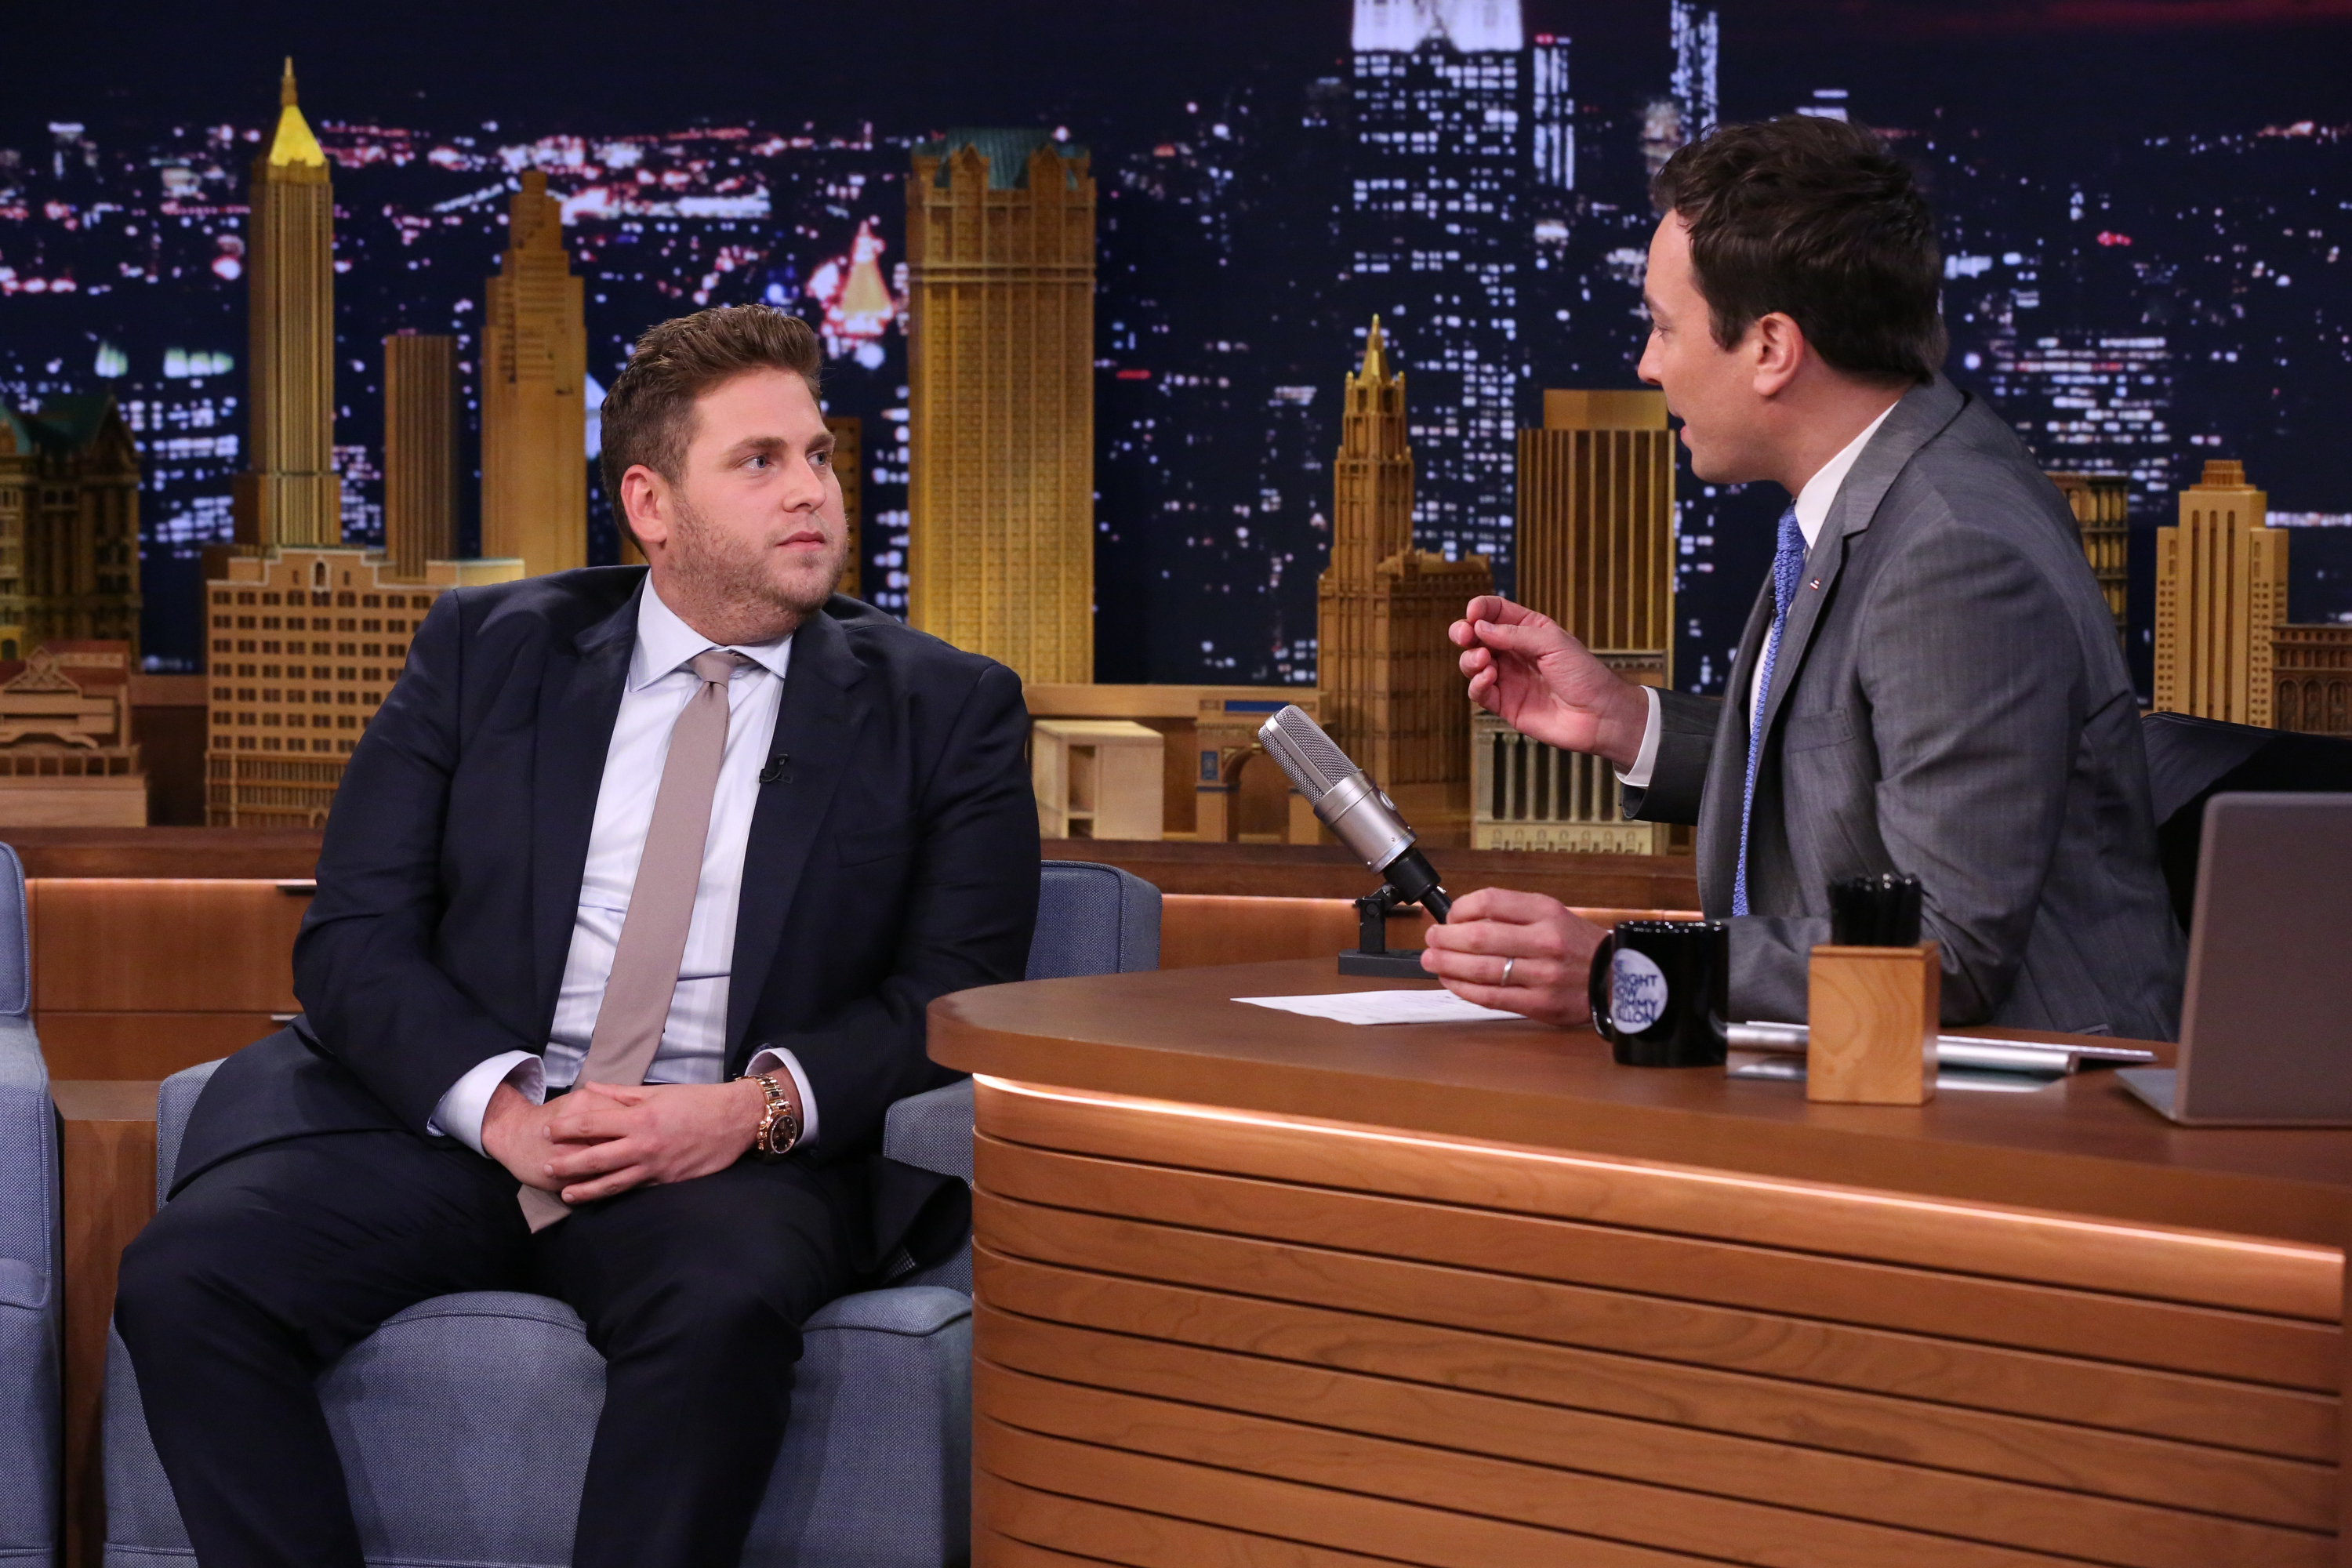 Jonah Hill during an interview with host Jimmy Fallon on June 3, 2014. (NBC&mdash;NBCU Photo Bank via Getty Images)